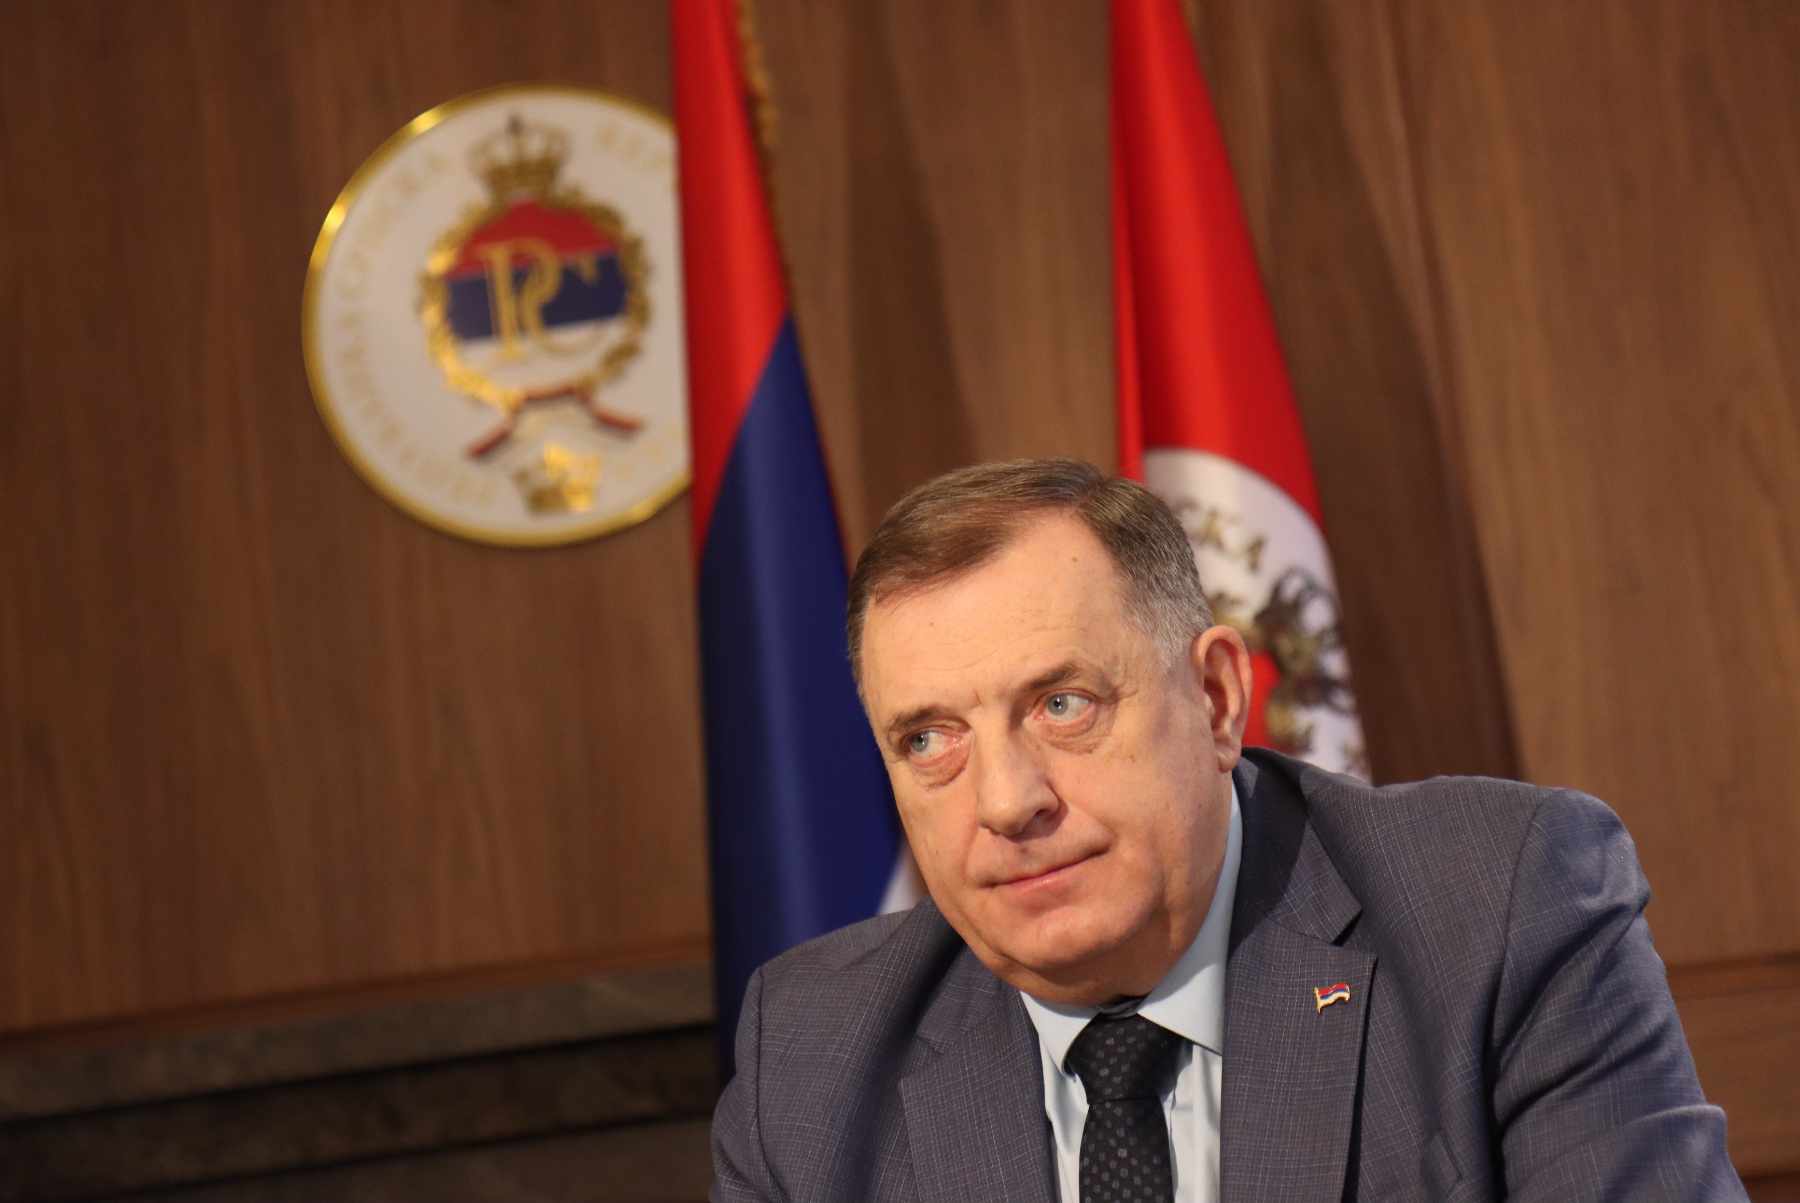 Dodik Calls On All Serbs In The United States To Vote For Trump